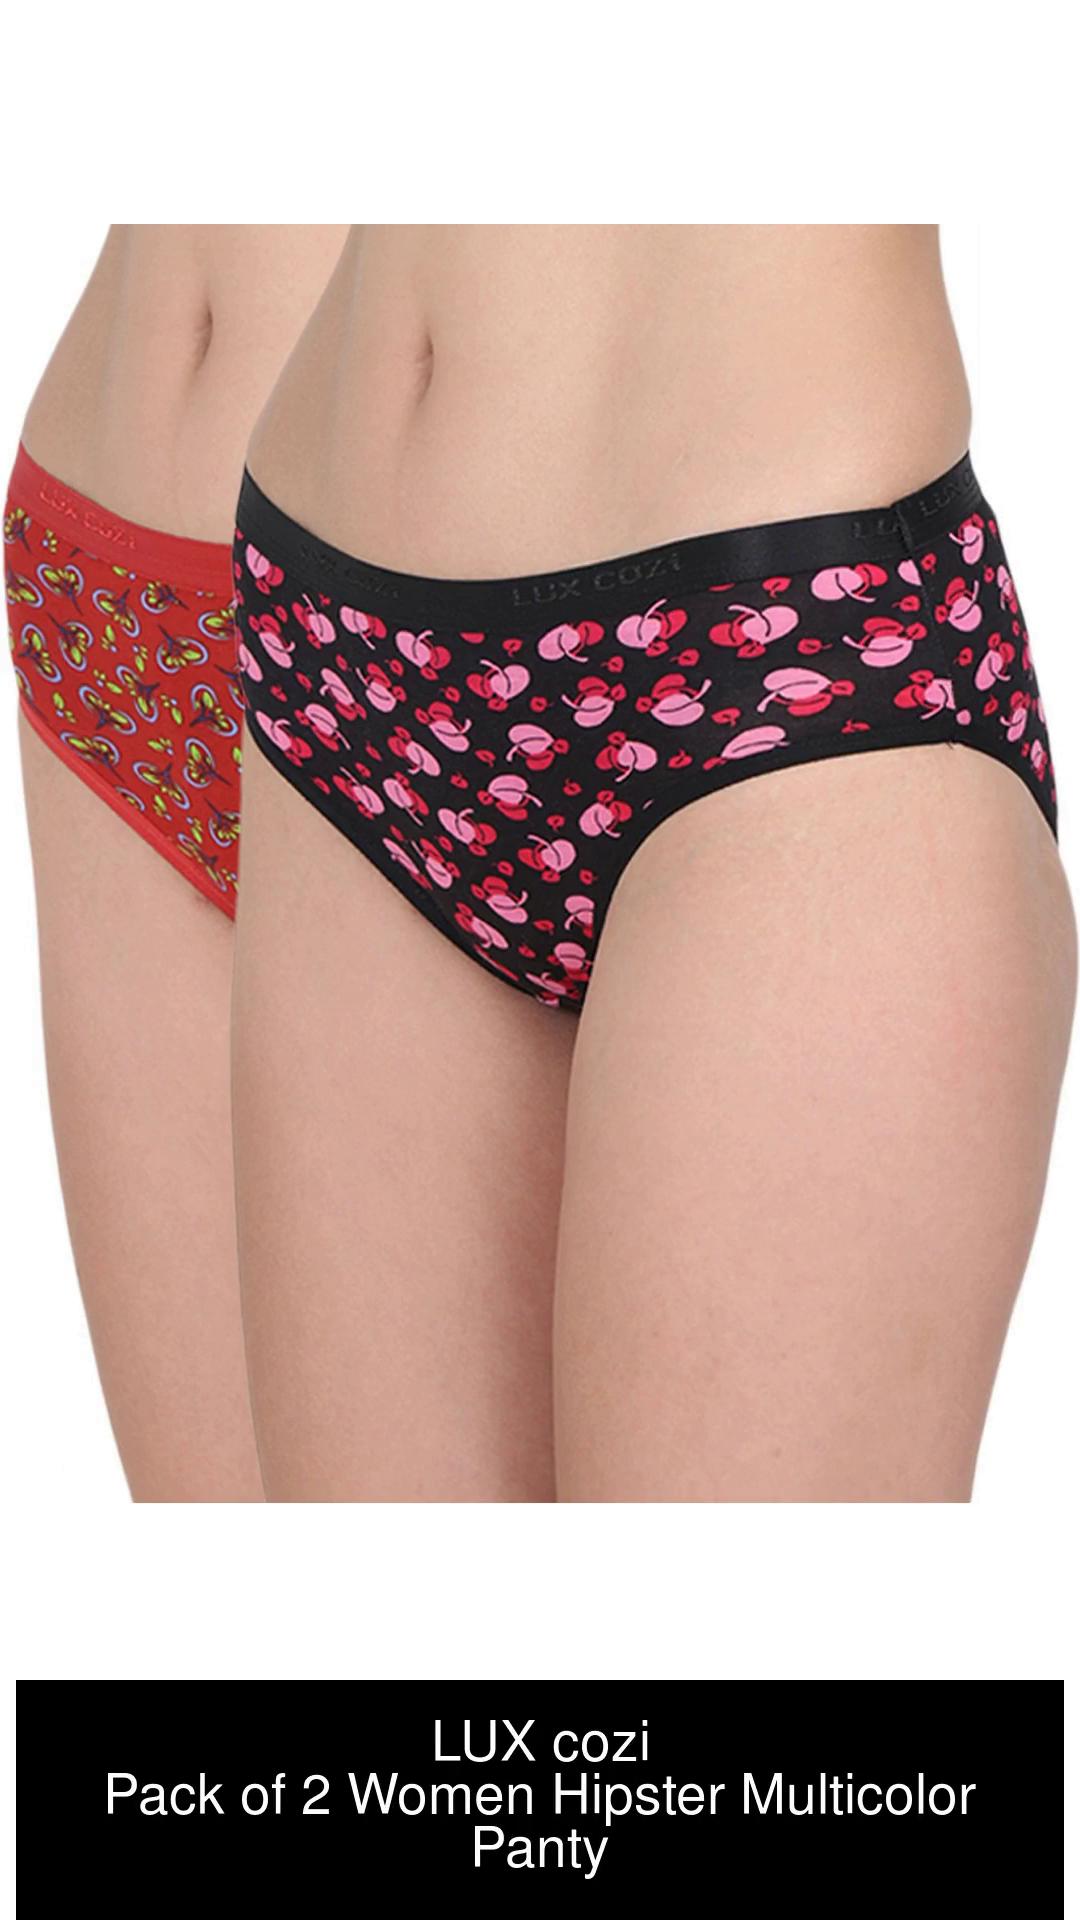 Ladyland Women Hipster Multicolor Panty - Price History